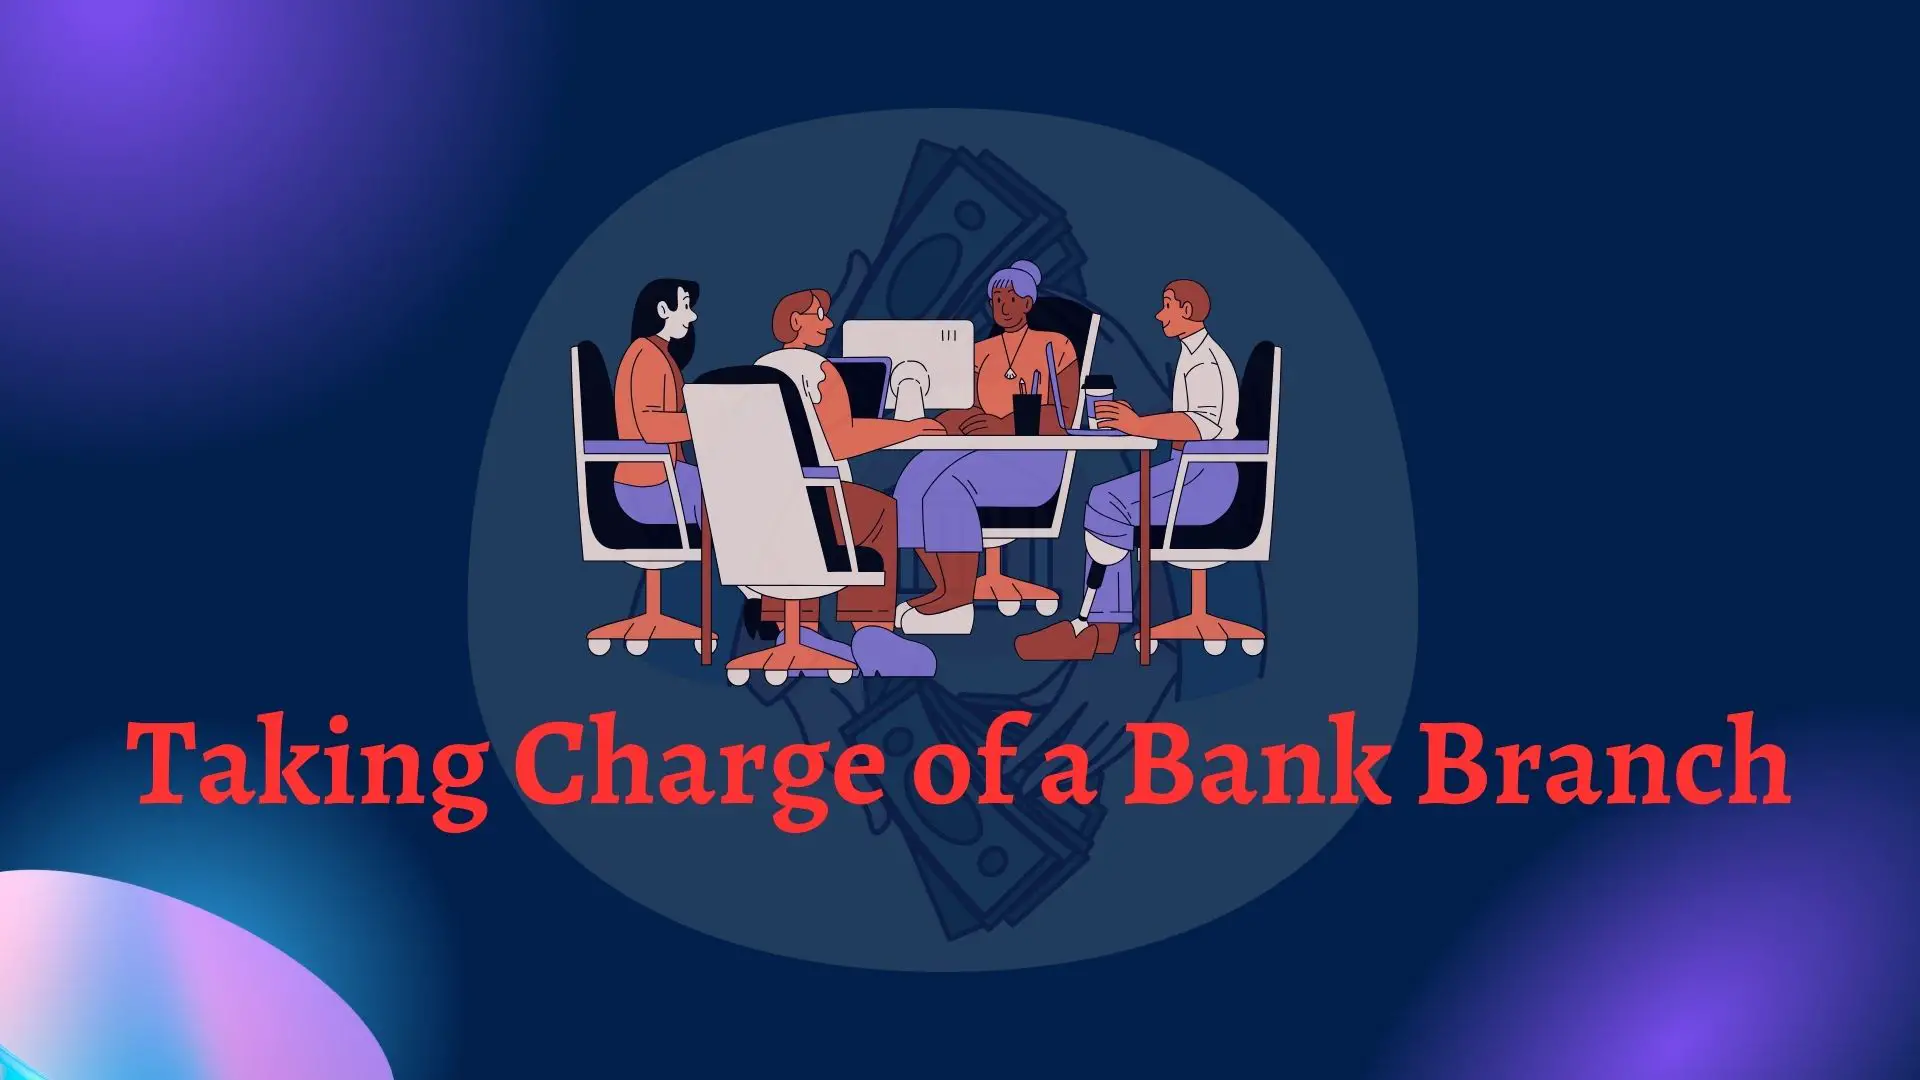 Charge taking of a Bank Branch